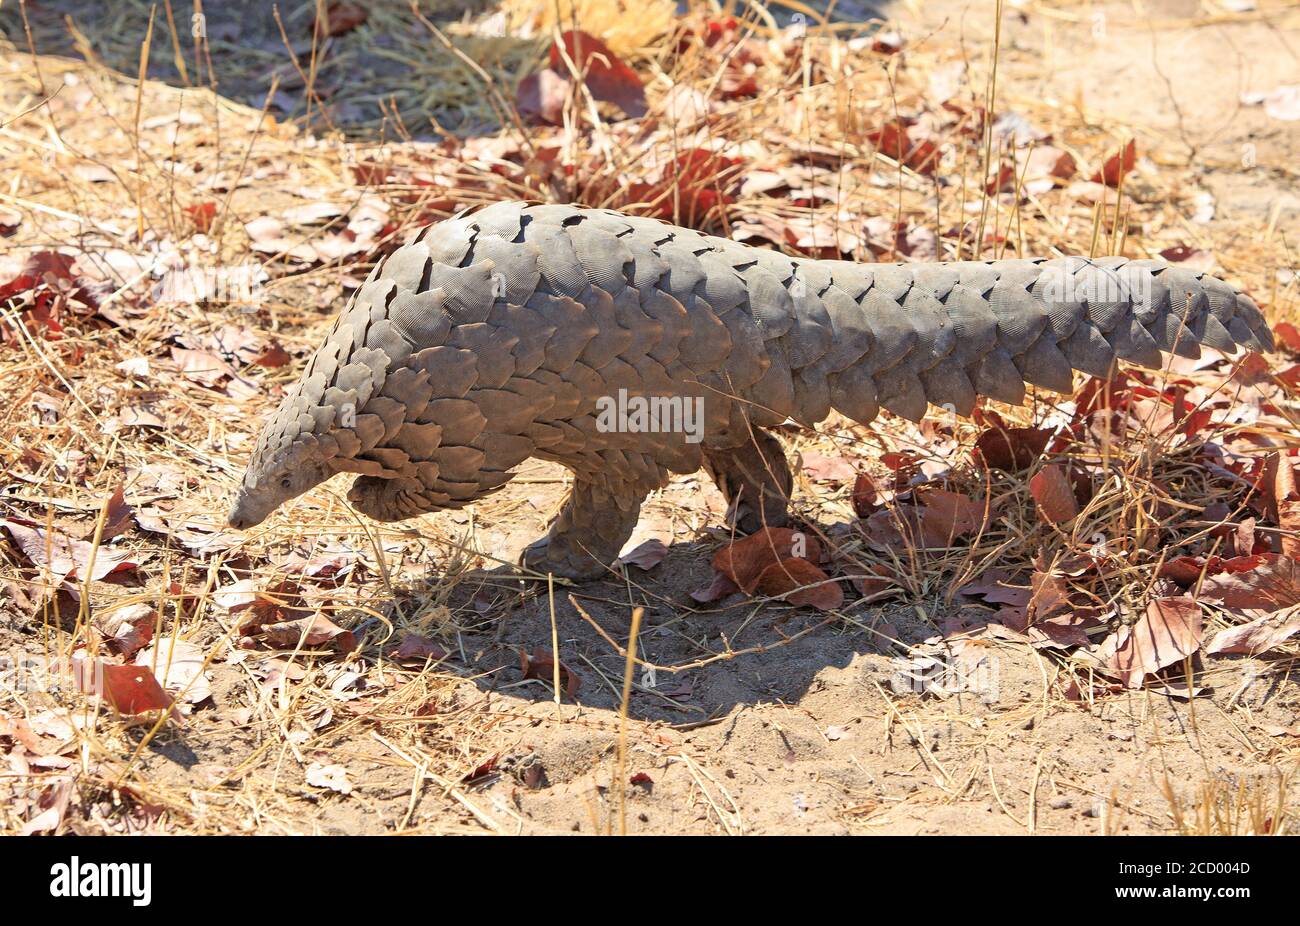 Critically endangered Pangolin walking in the bush- Scientific name Manis - it was sighted in the african bush in Hwange National Park, Zimbabwe.  The Stock Photo